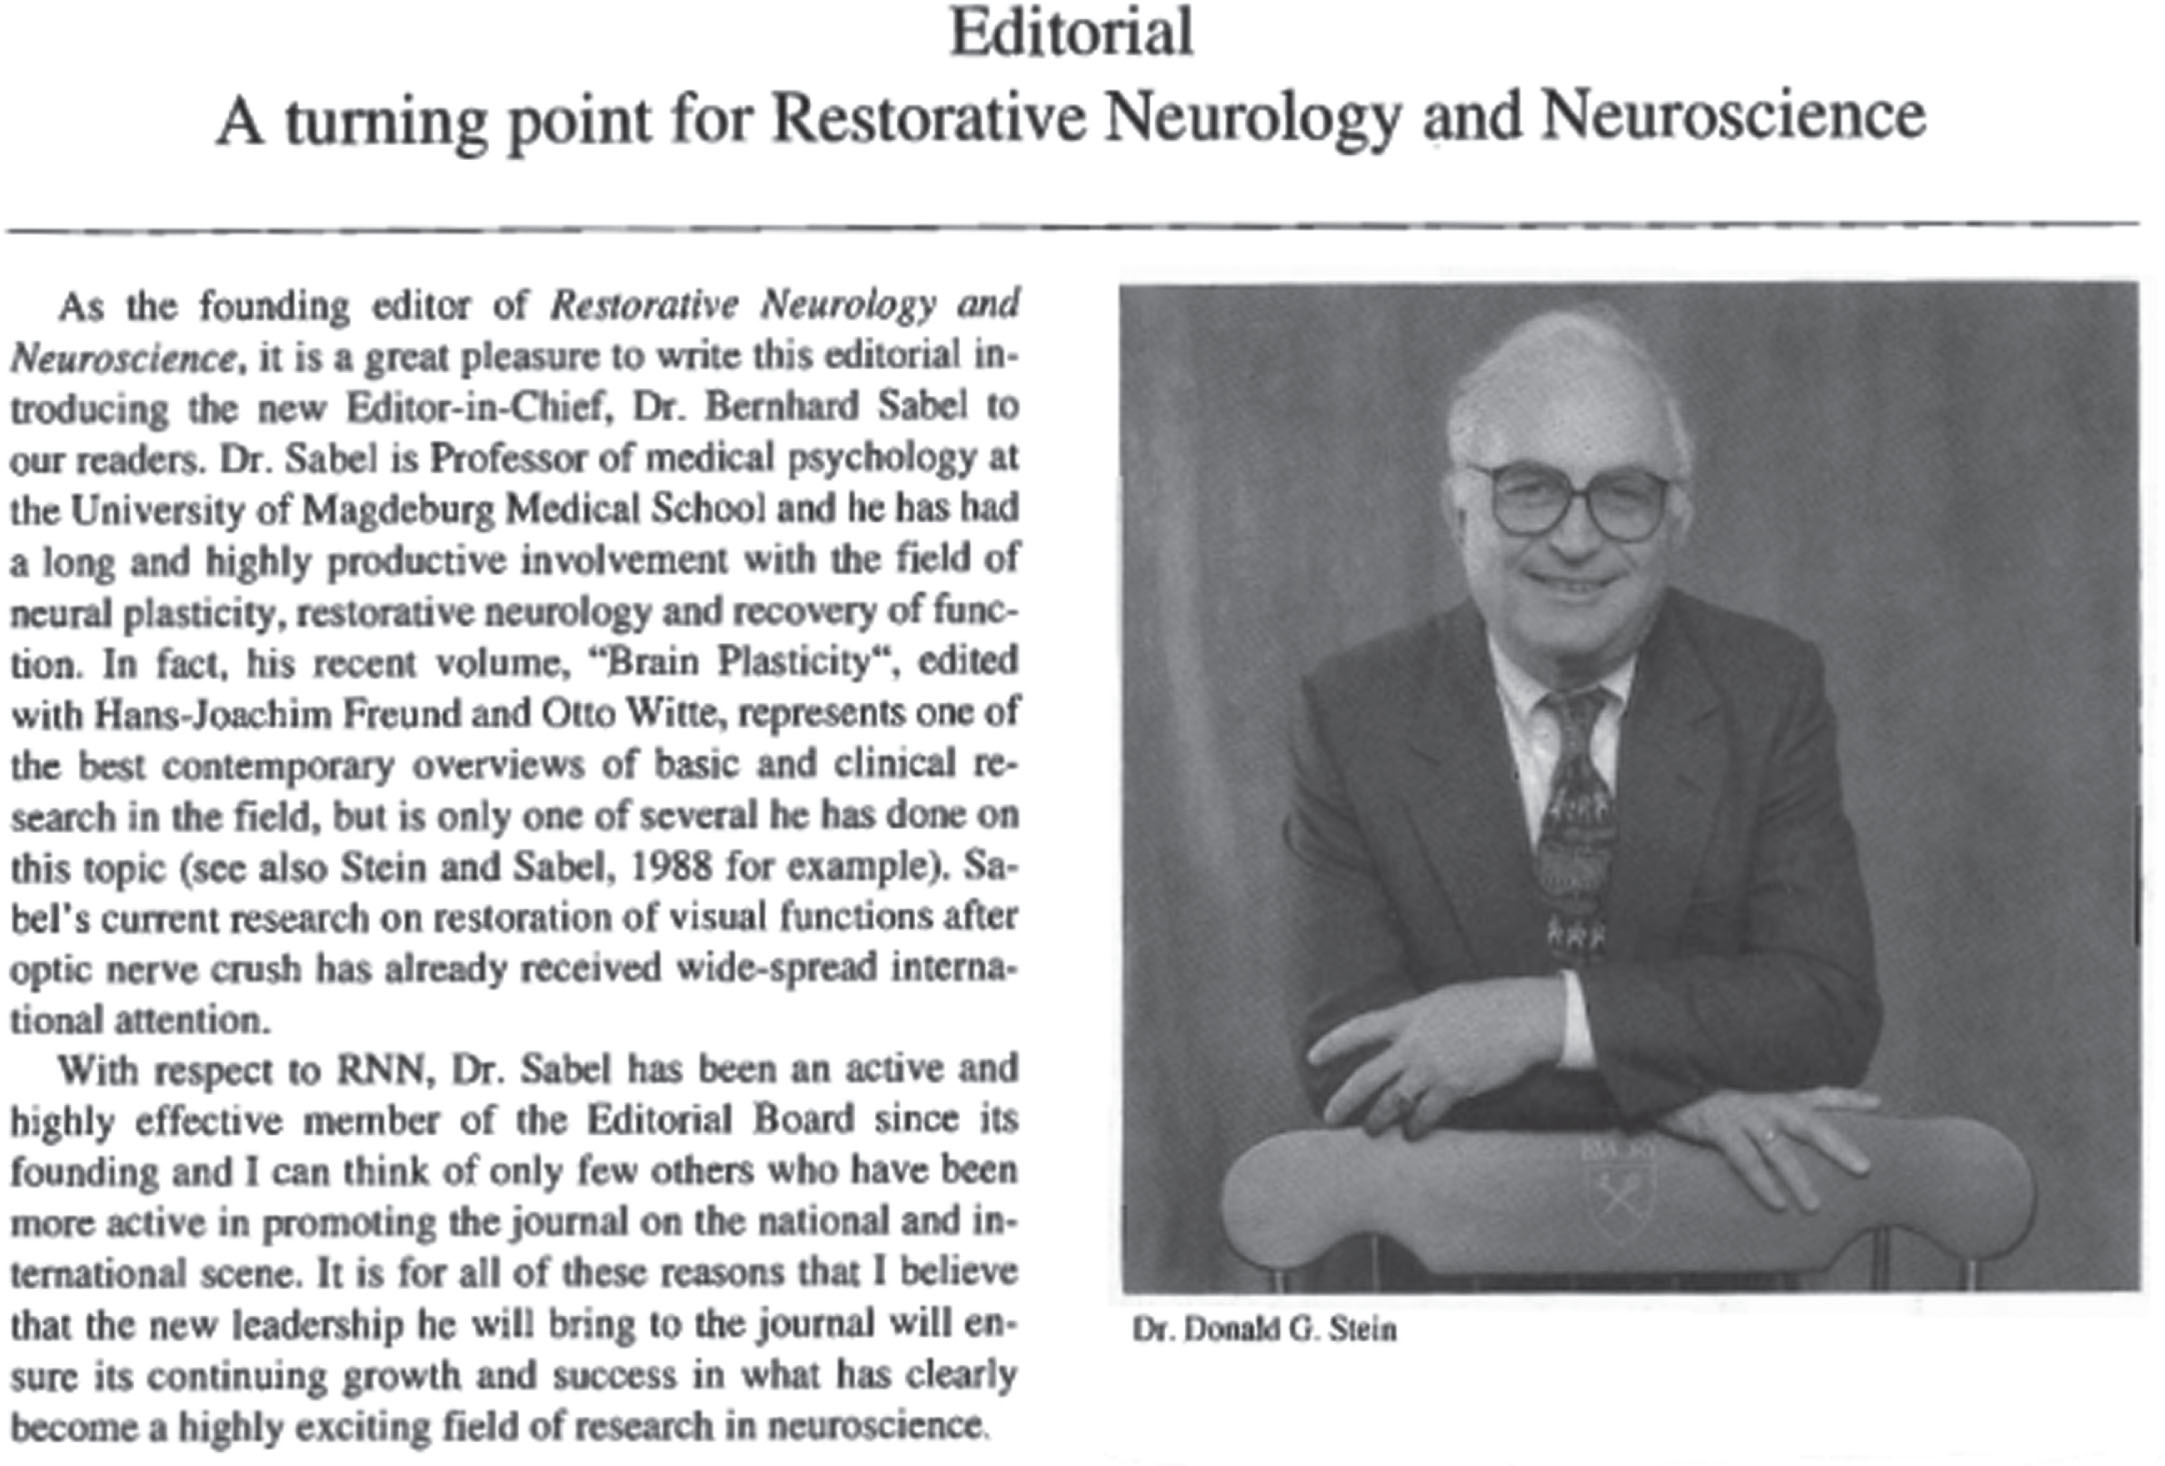 The Editorial where Editorship was turned over from the founder, Donald G. Stein to Bernhard A. Sabel.